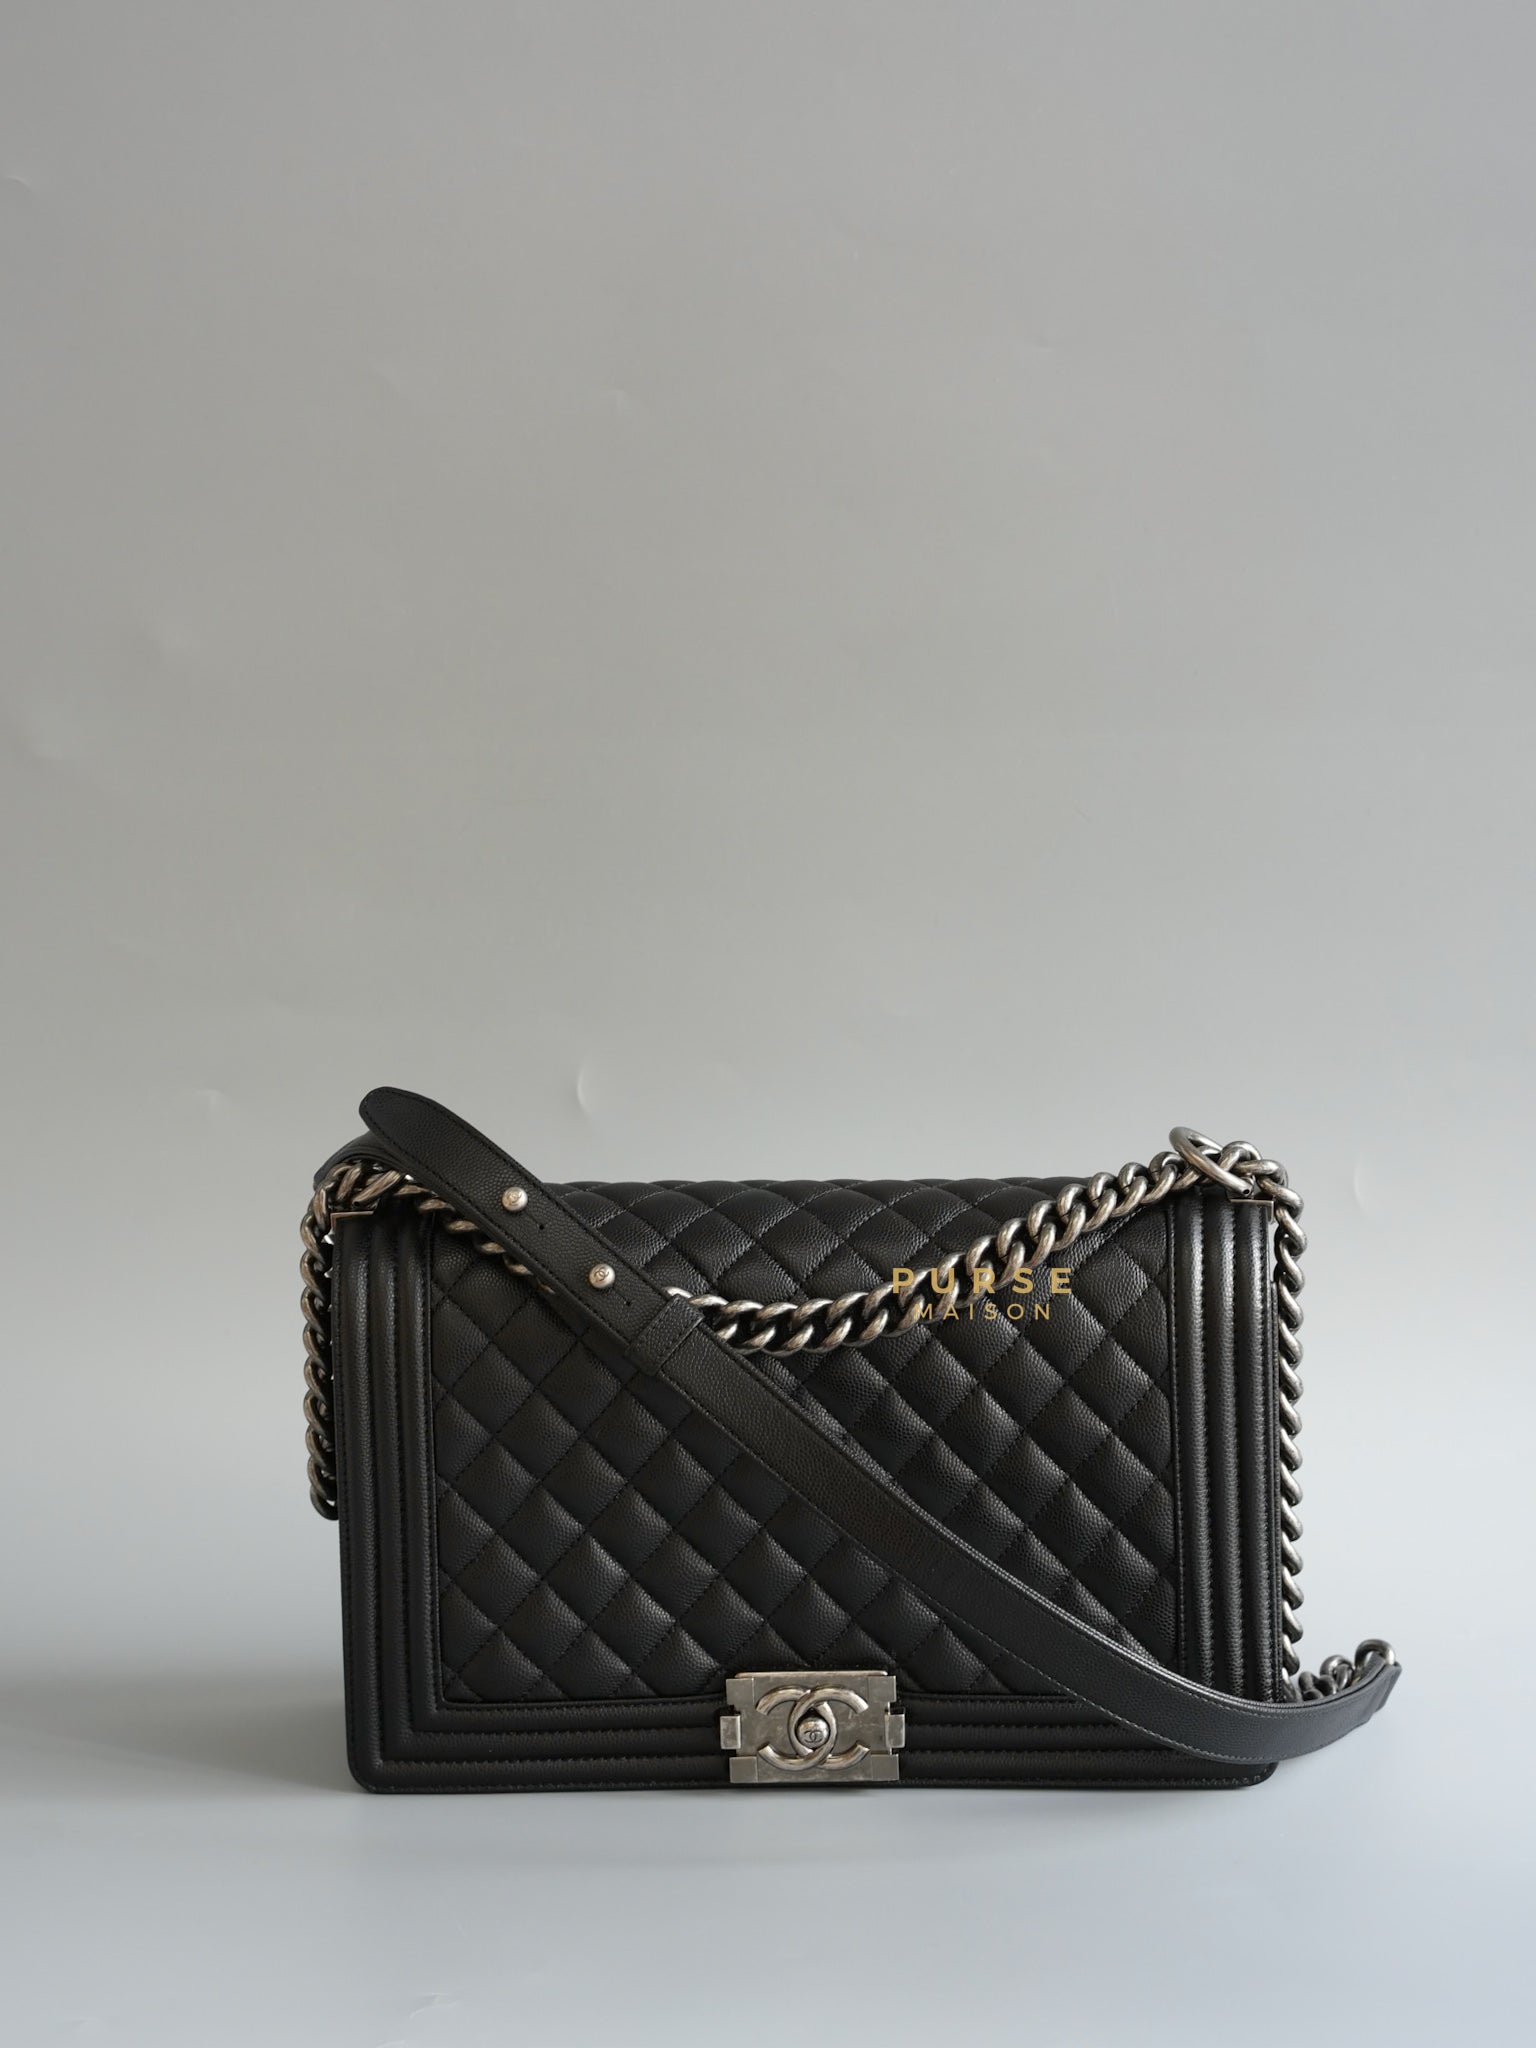 Boy New Medium in Black Quilted Caviar Leather & Ruthenium Hardware (Microchip) | Purse Maison Luxury Bags Shop